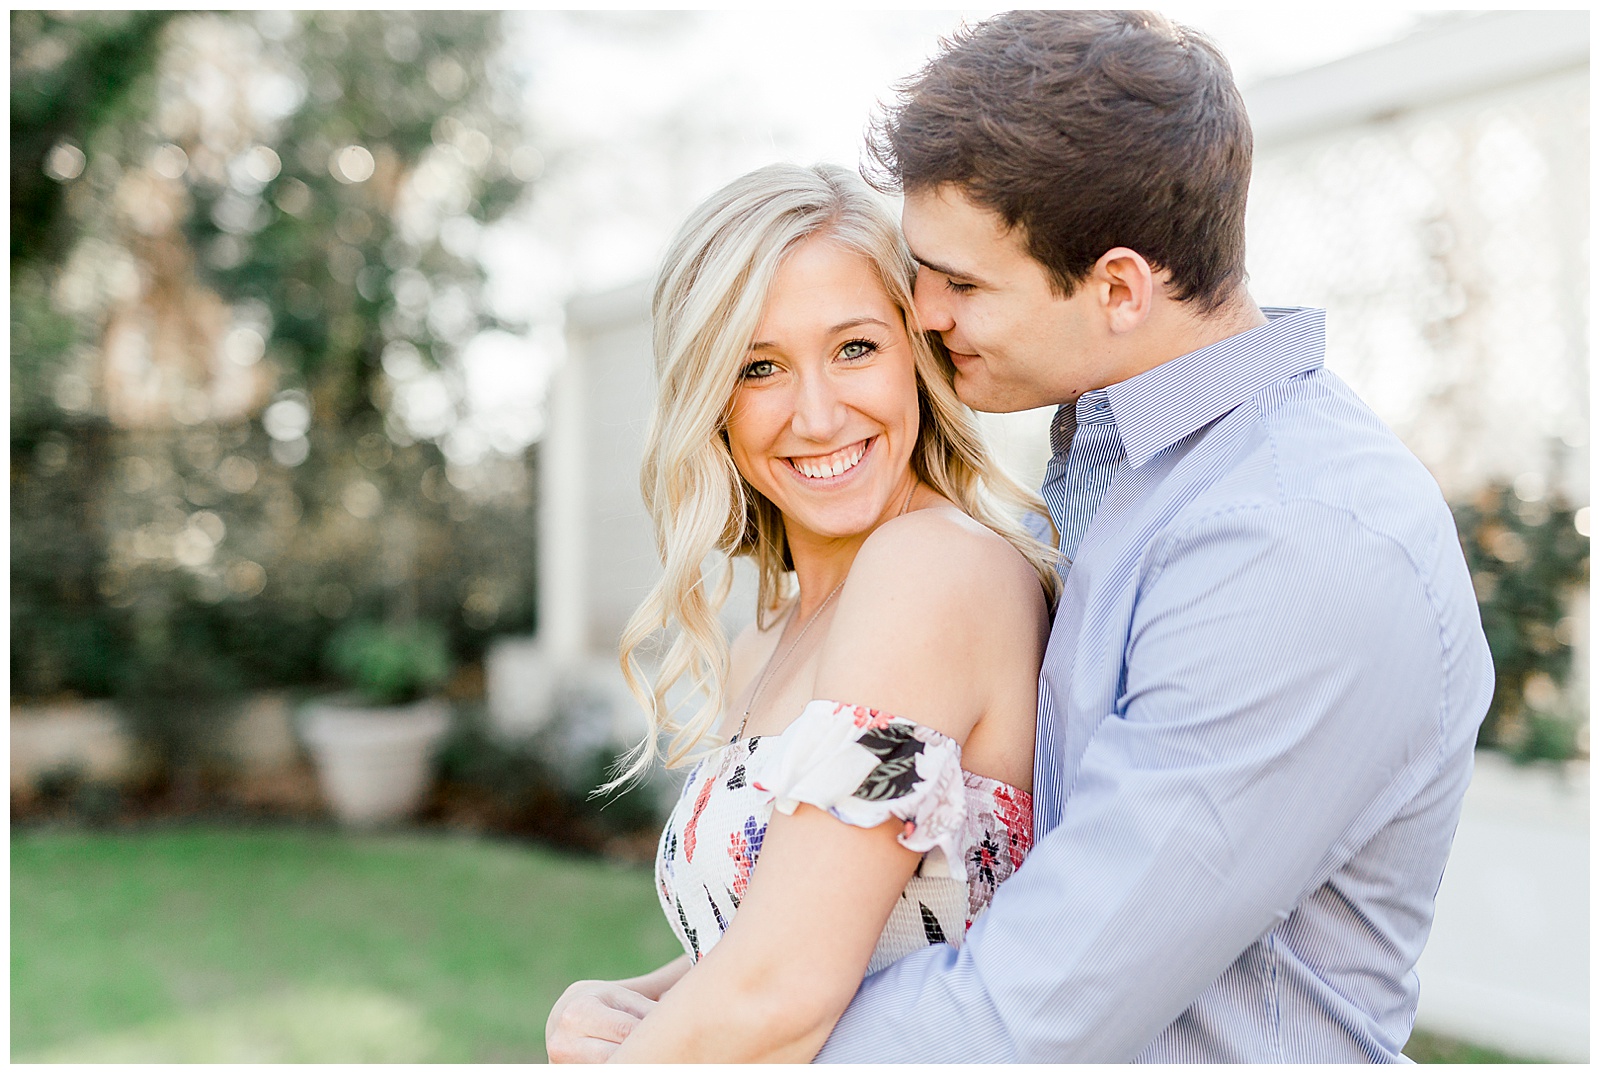 Adorable Couple Posing Outdoors in Gorgeous Light and Airy Separk Mansion Engagement Session - classy cute floral maxi dress outfit ideas